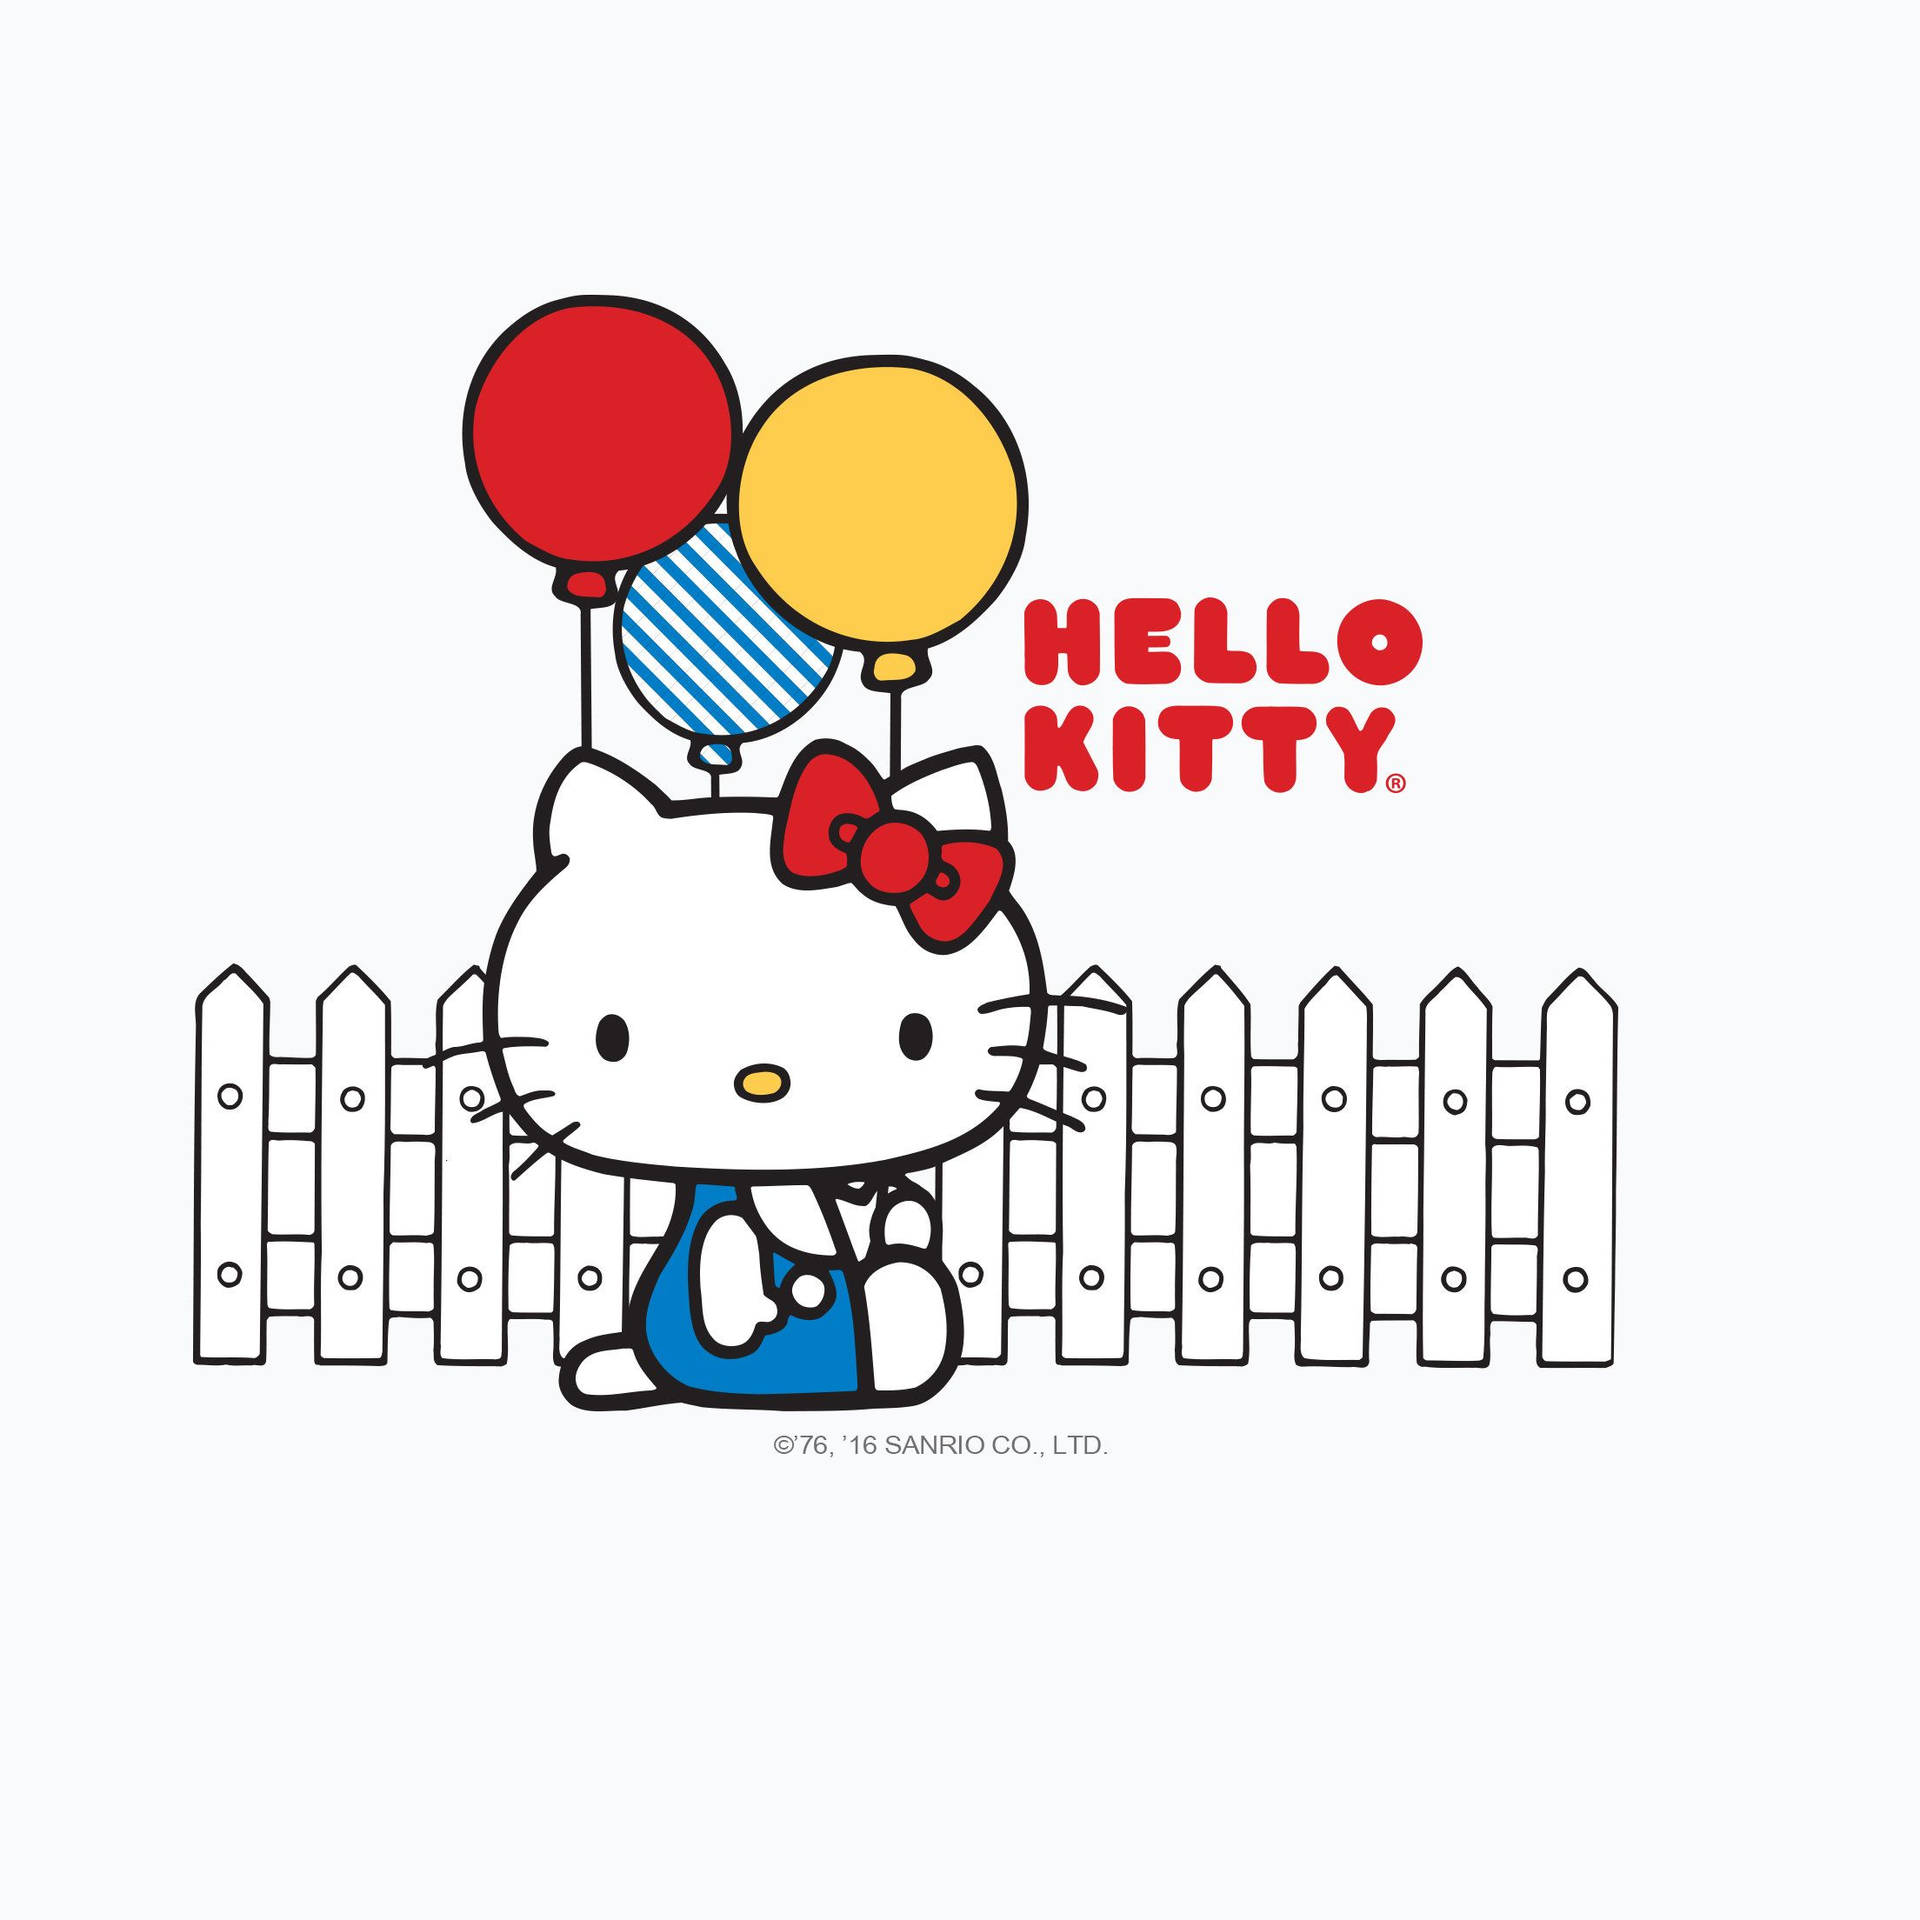 Hello Kitty and Balloons - Happiness in the Air Wallpaper